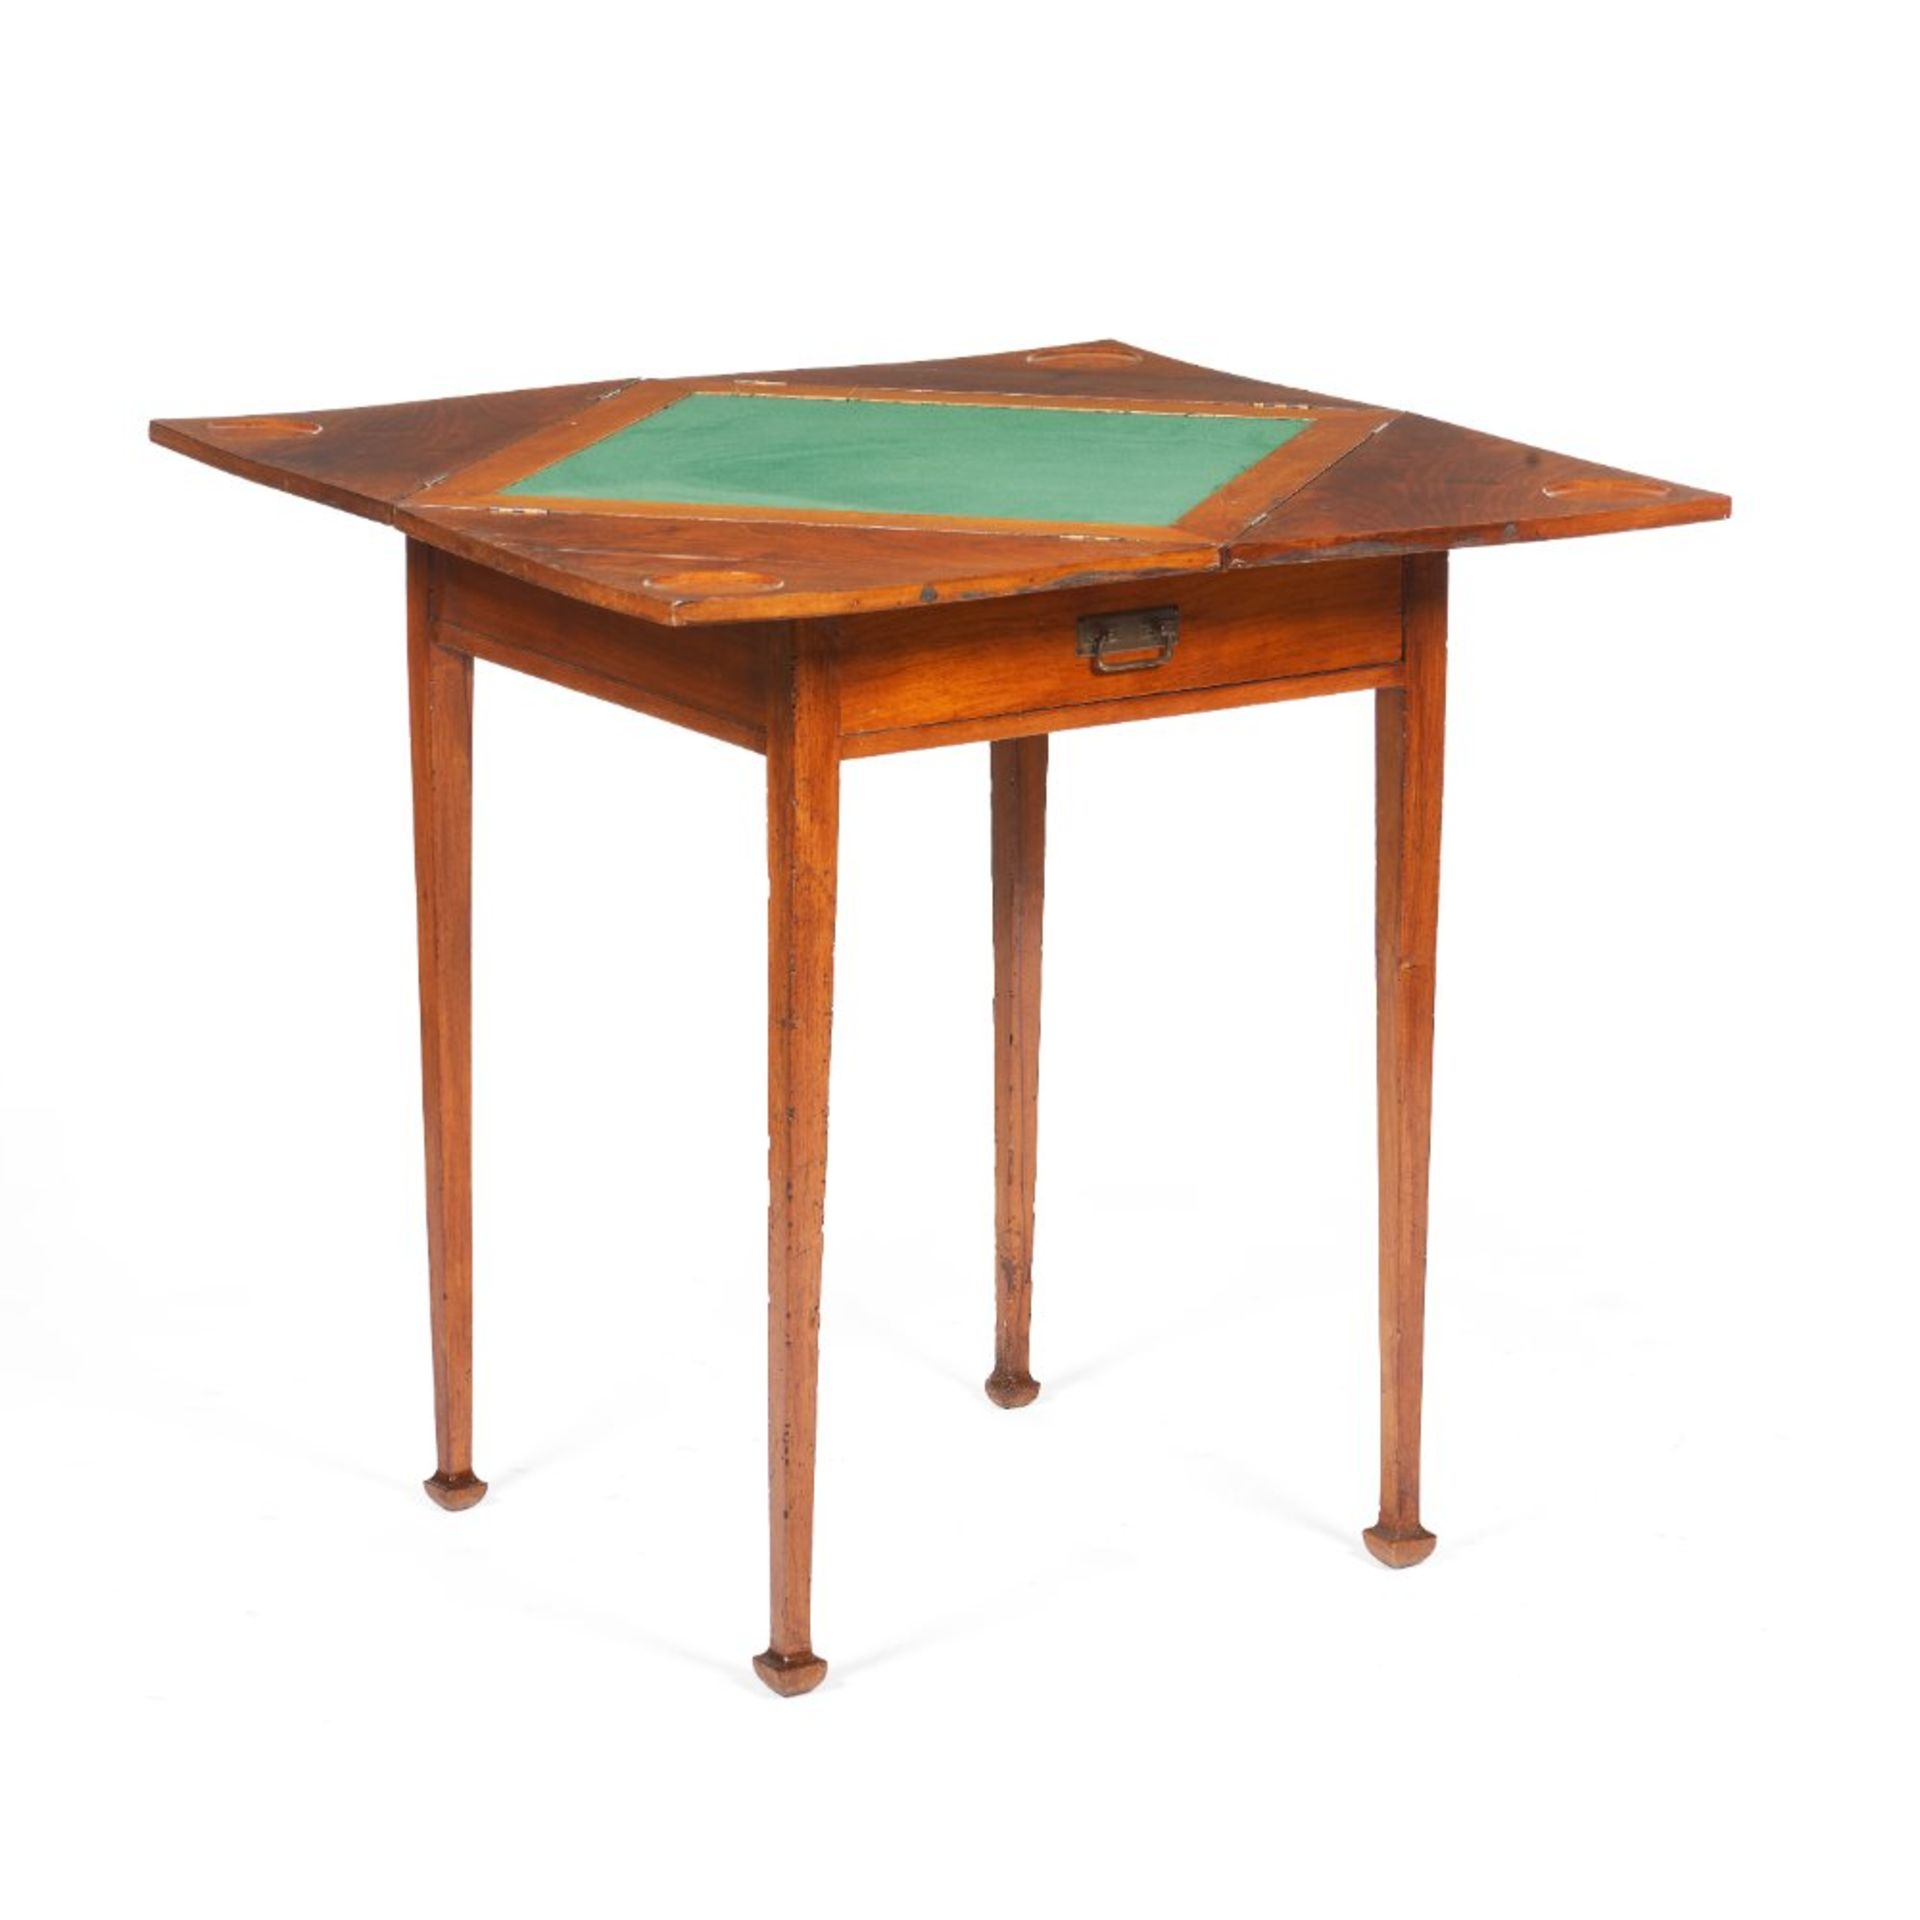 An Edwardian folding games table - Image 2 of 2